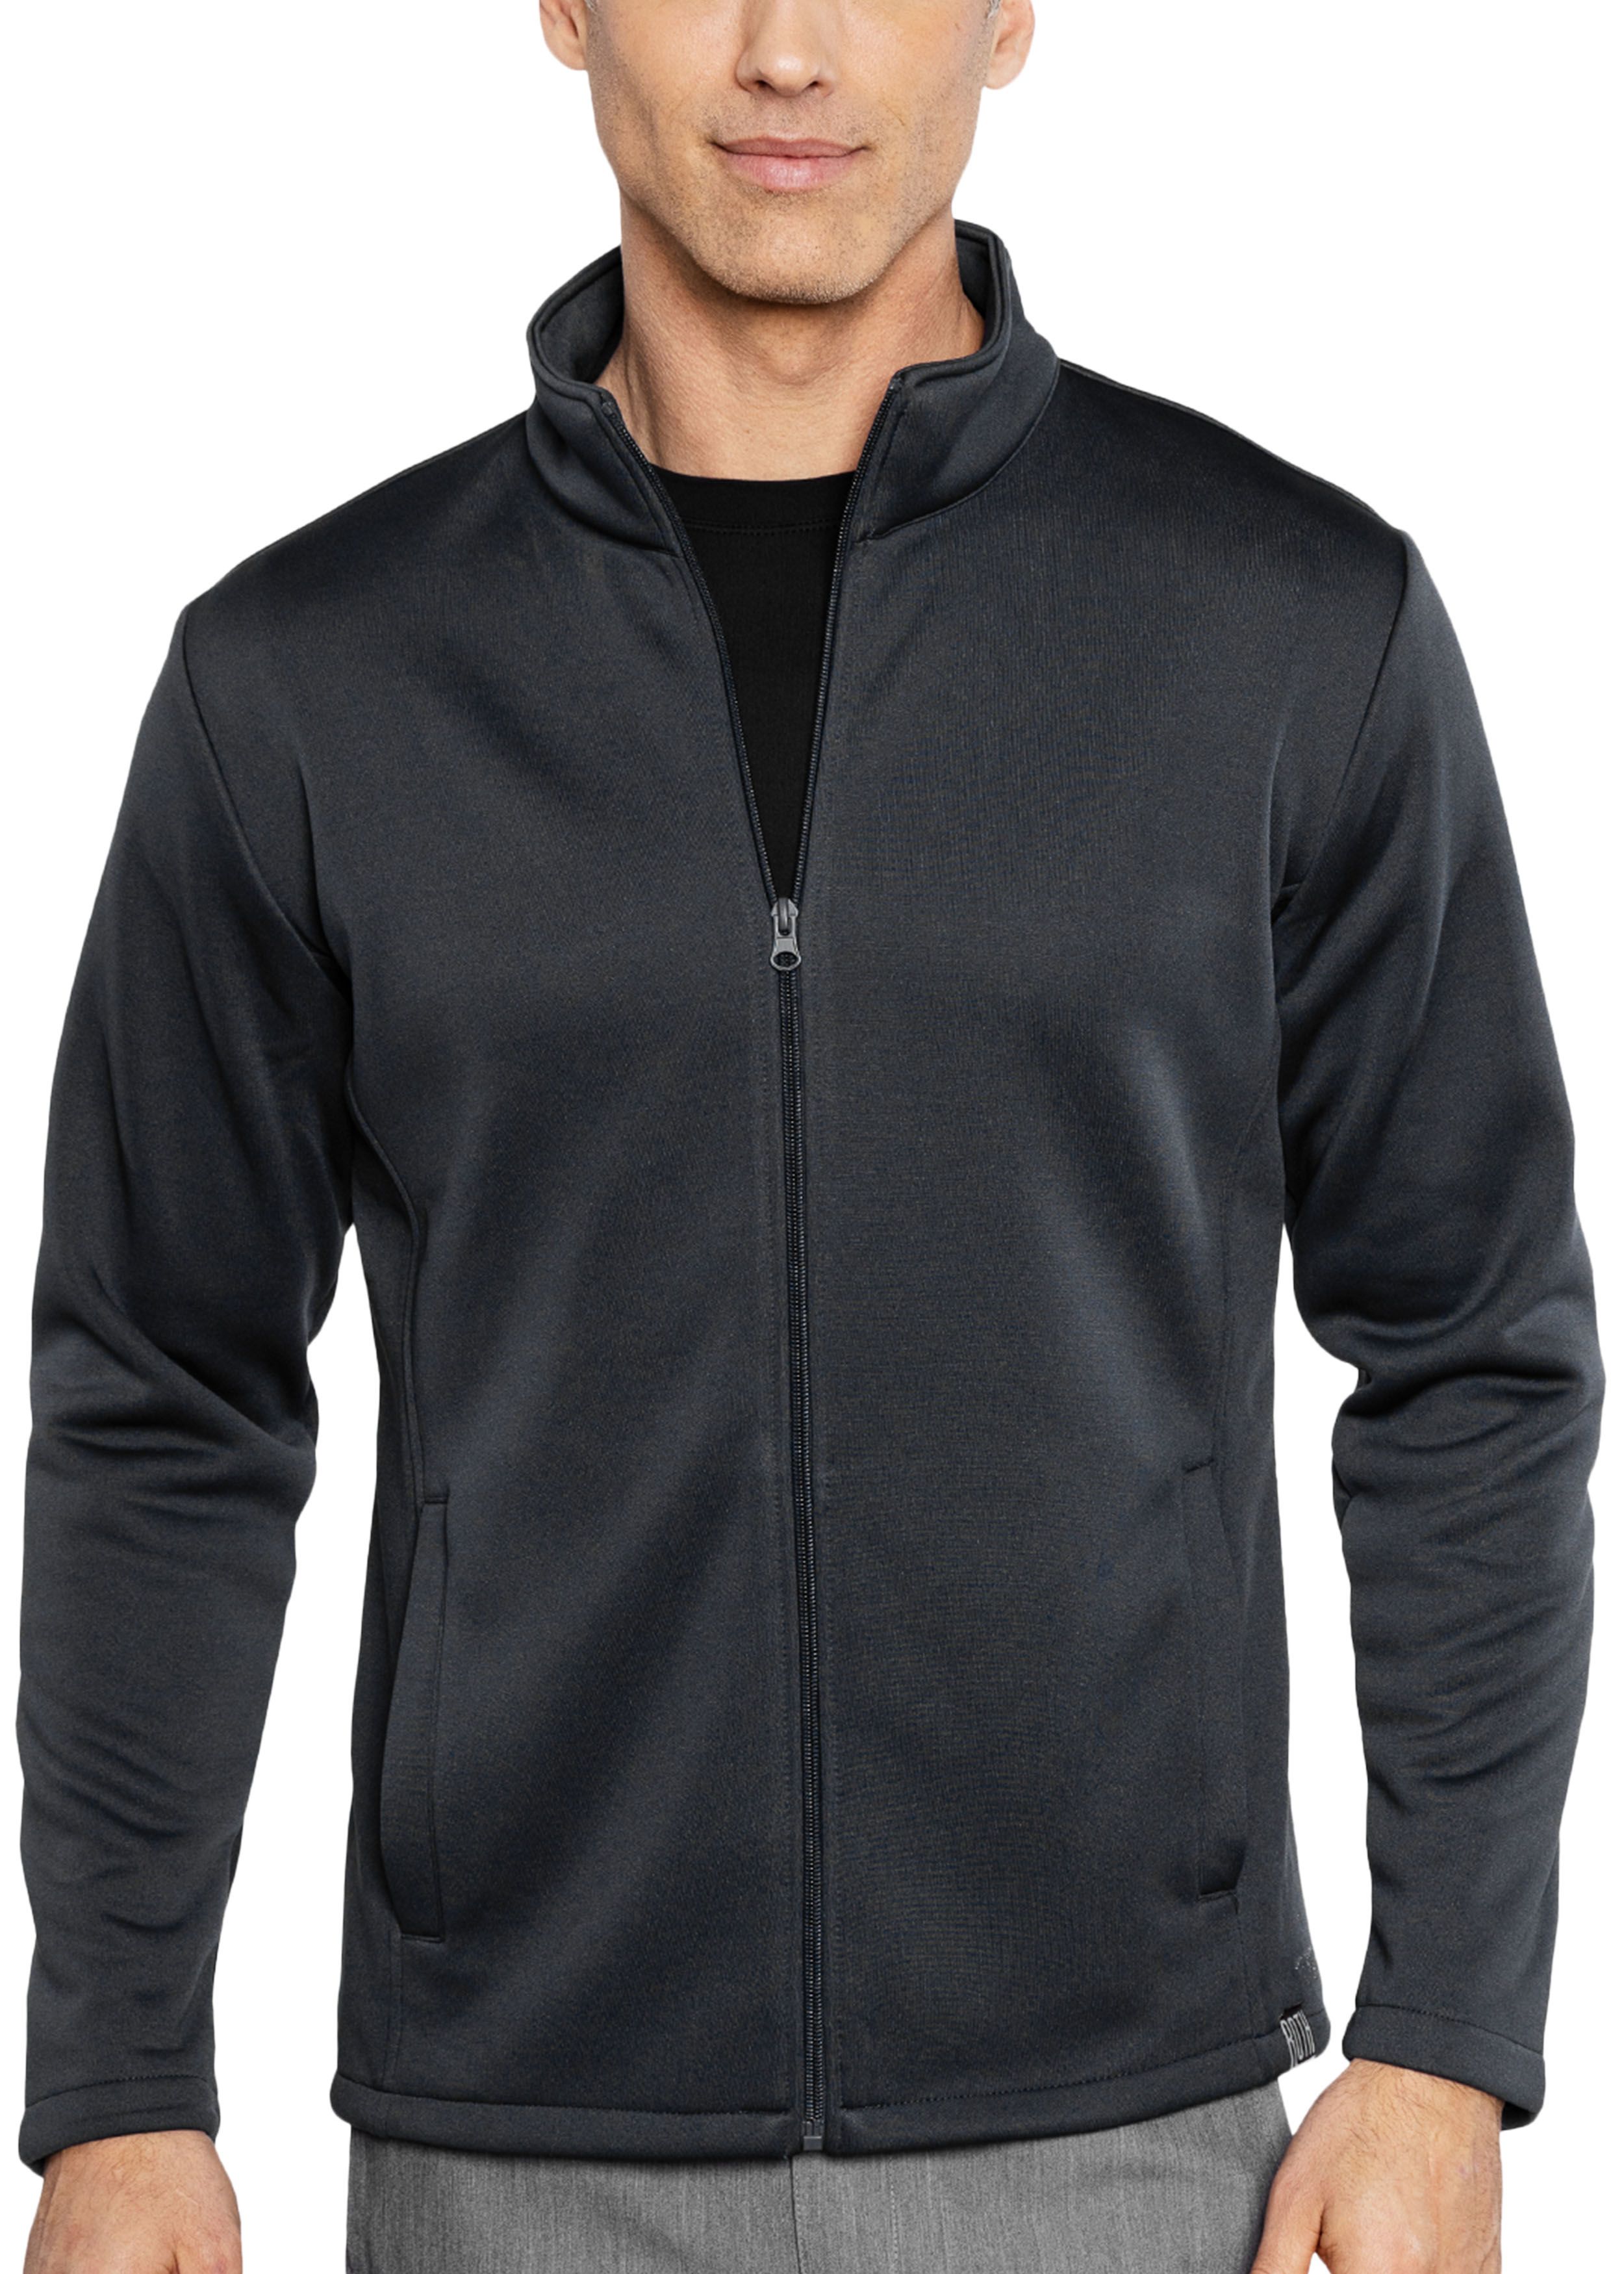 Med Couture Activate Med Tech for Men Scrub Jackets